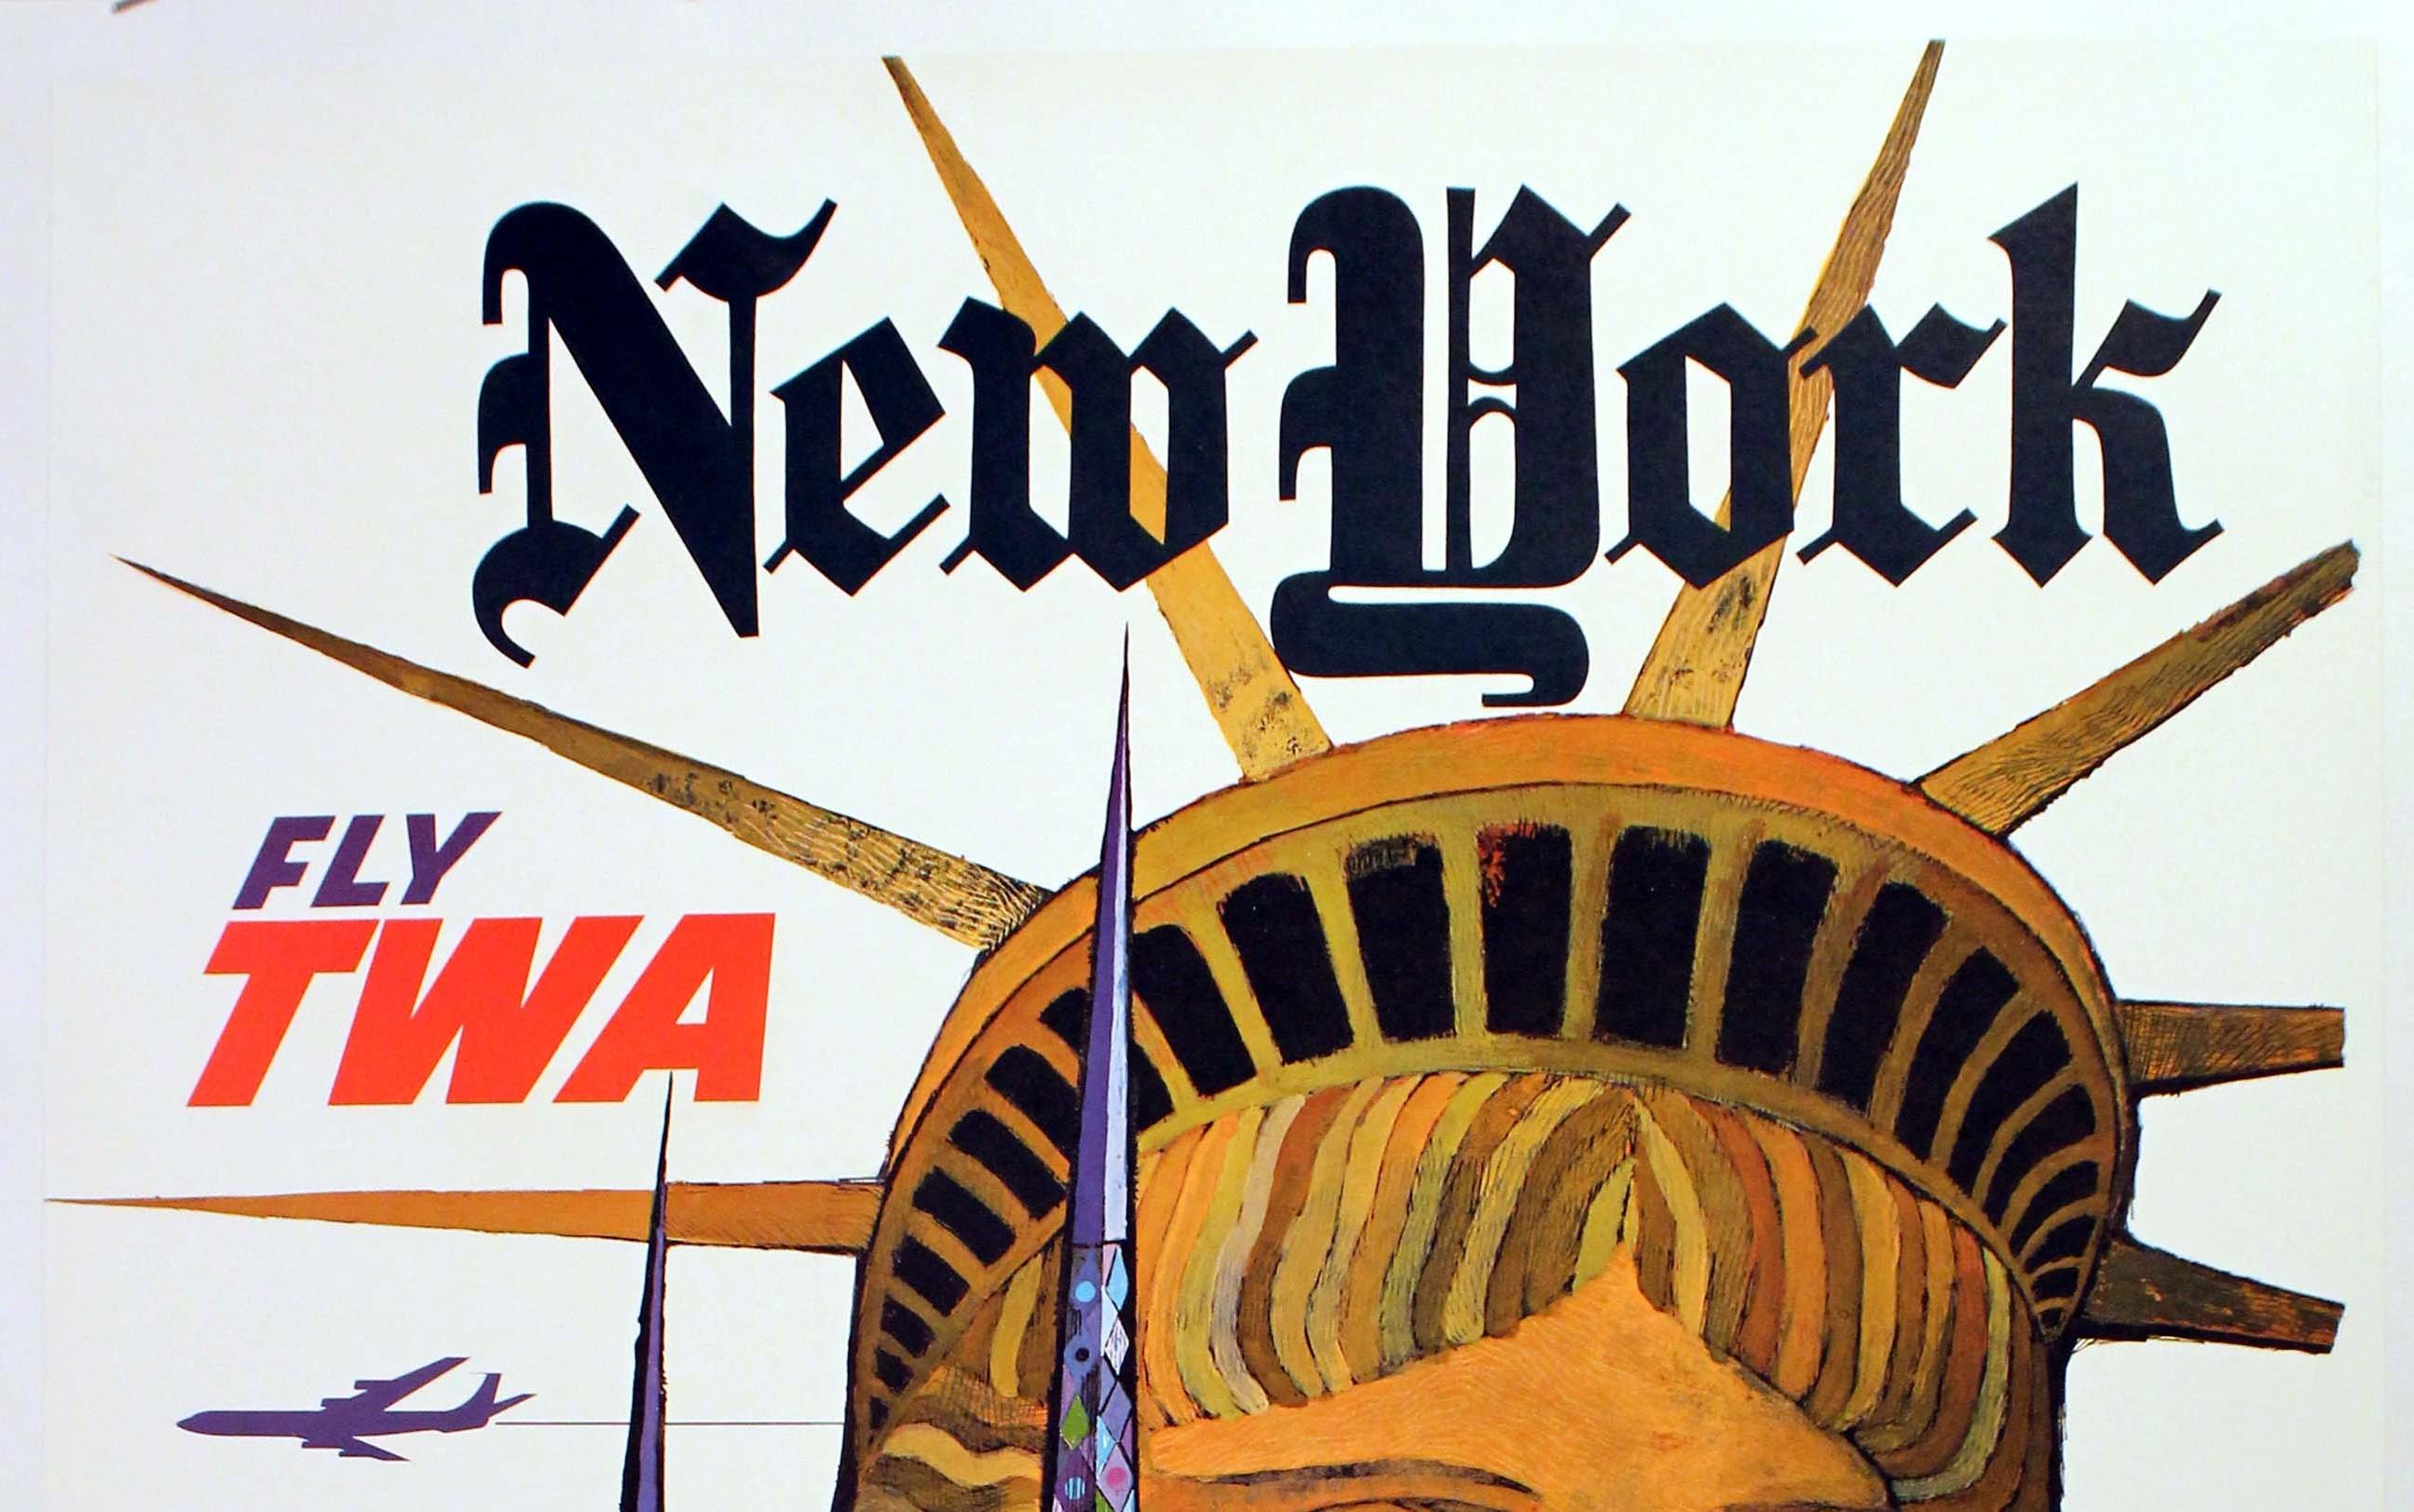 Original vintage travel poster advertising New York by TWA featuring a close-up image of the Statue of Liberty looking over the Brooklyn Bridge, cathedral and other city monuments with a plane flying by in the background. Artwork by American artist